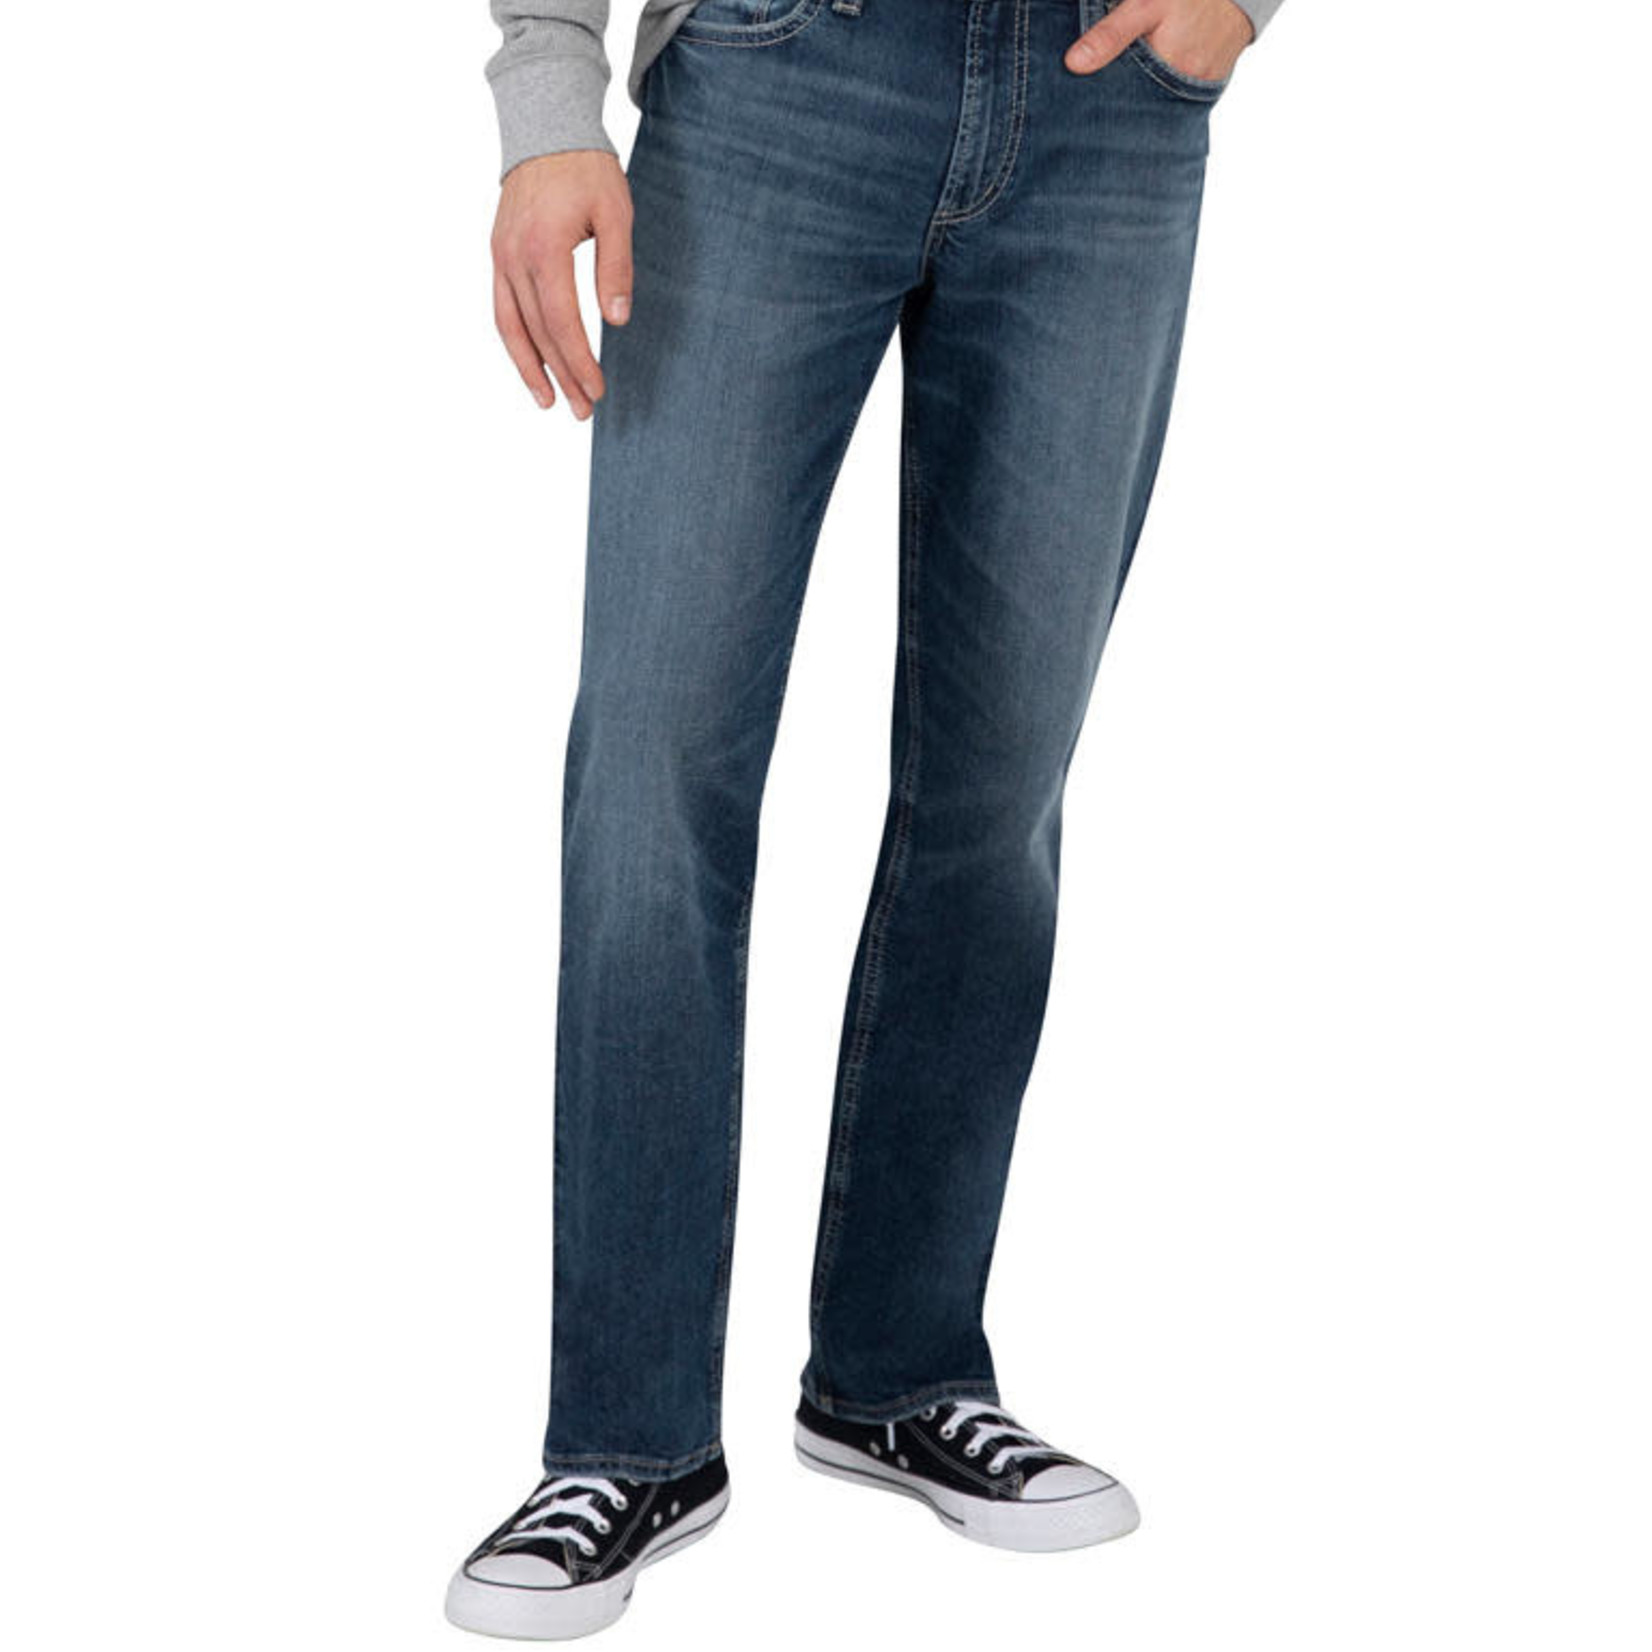 Silver Jeans The "Grayson 360" by Silver Jeans